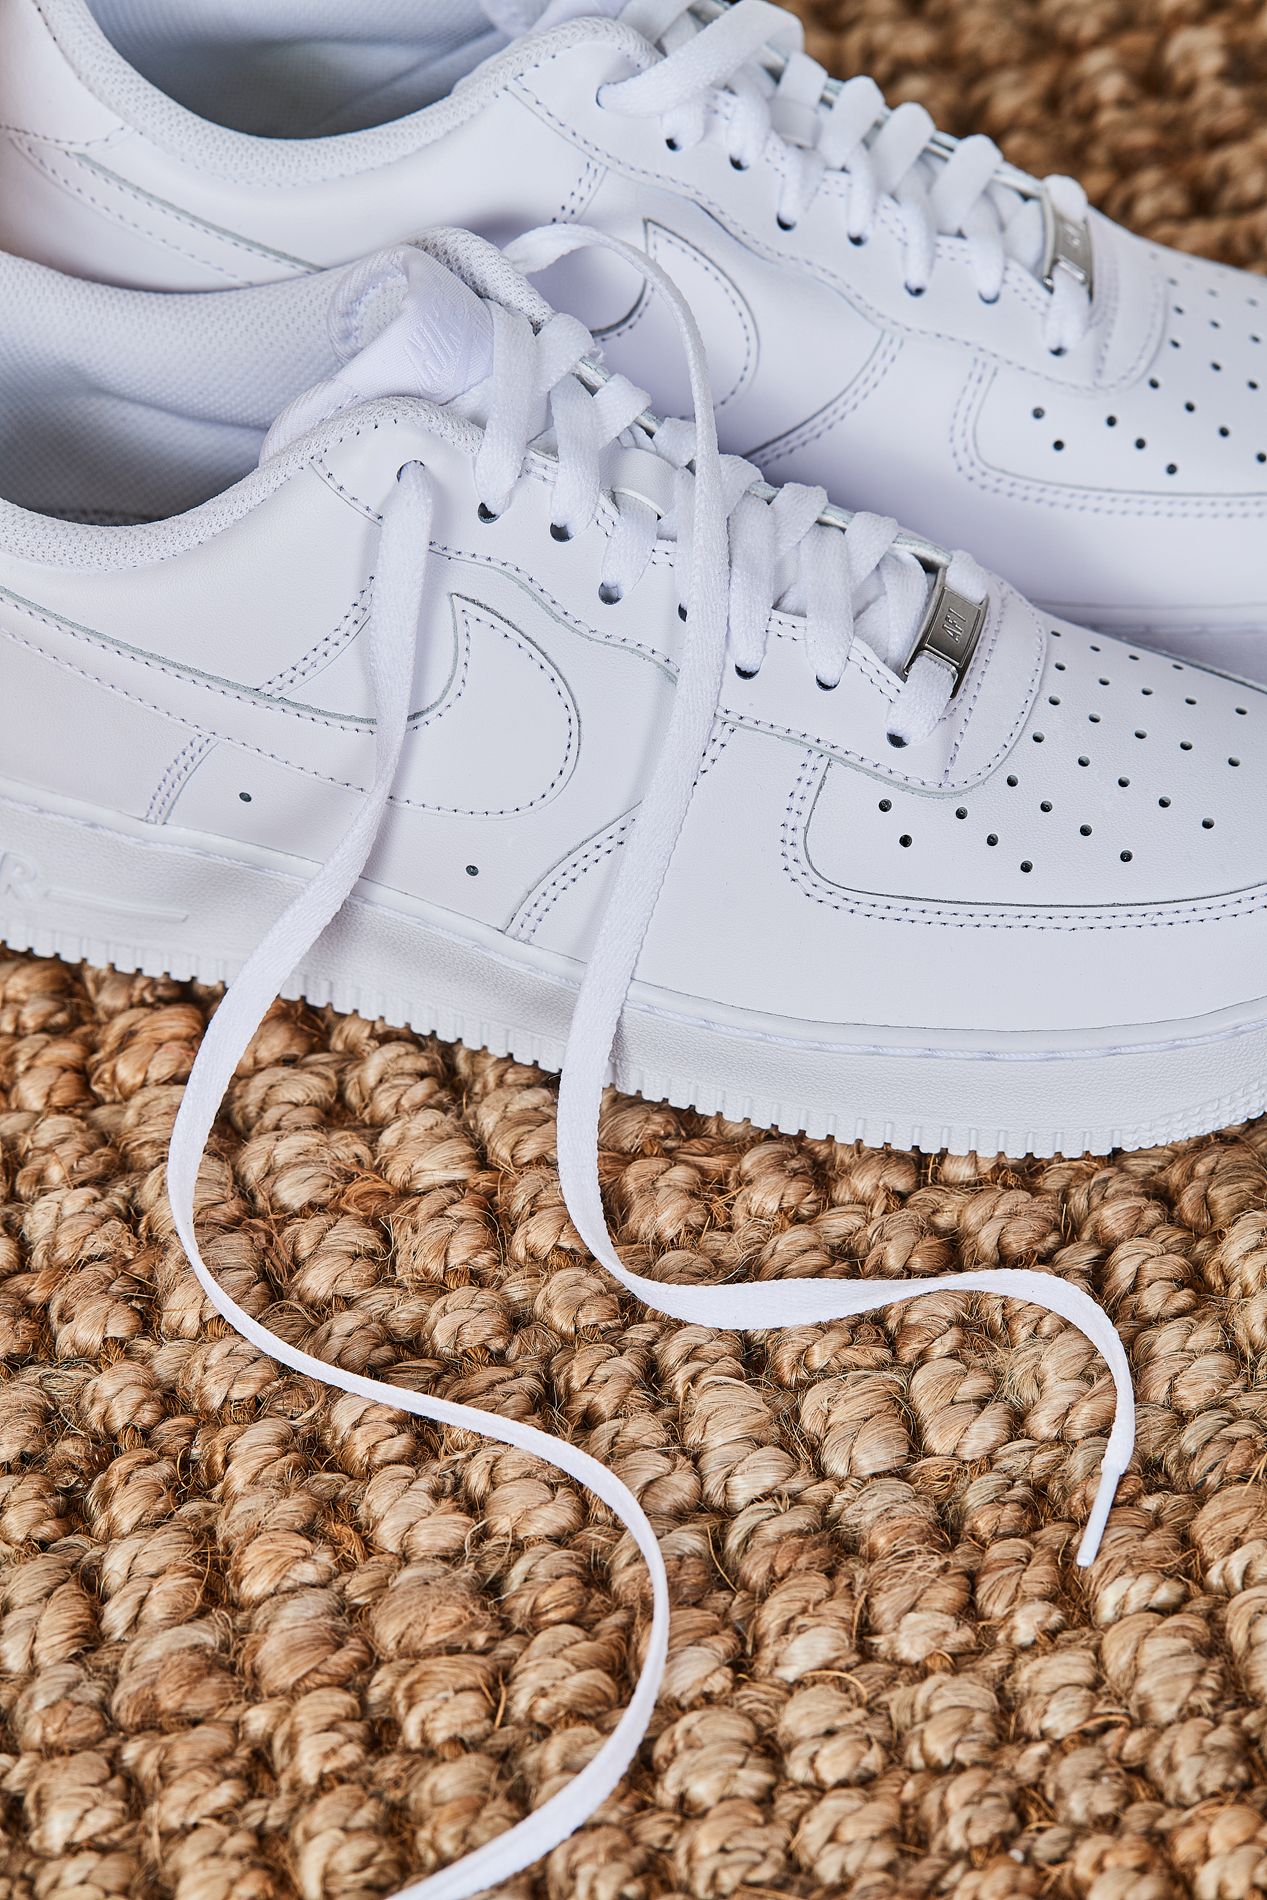 Designed in 1982, the Nike Air Force 1 has permeated culture for